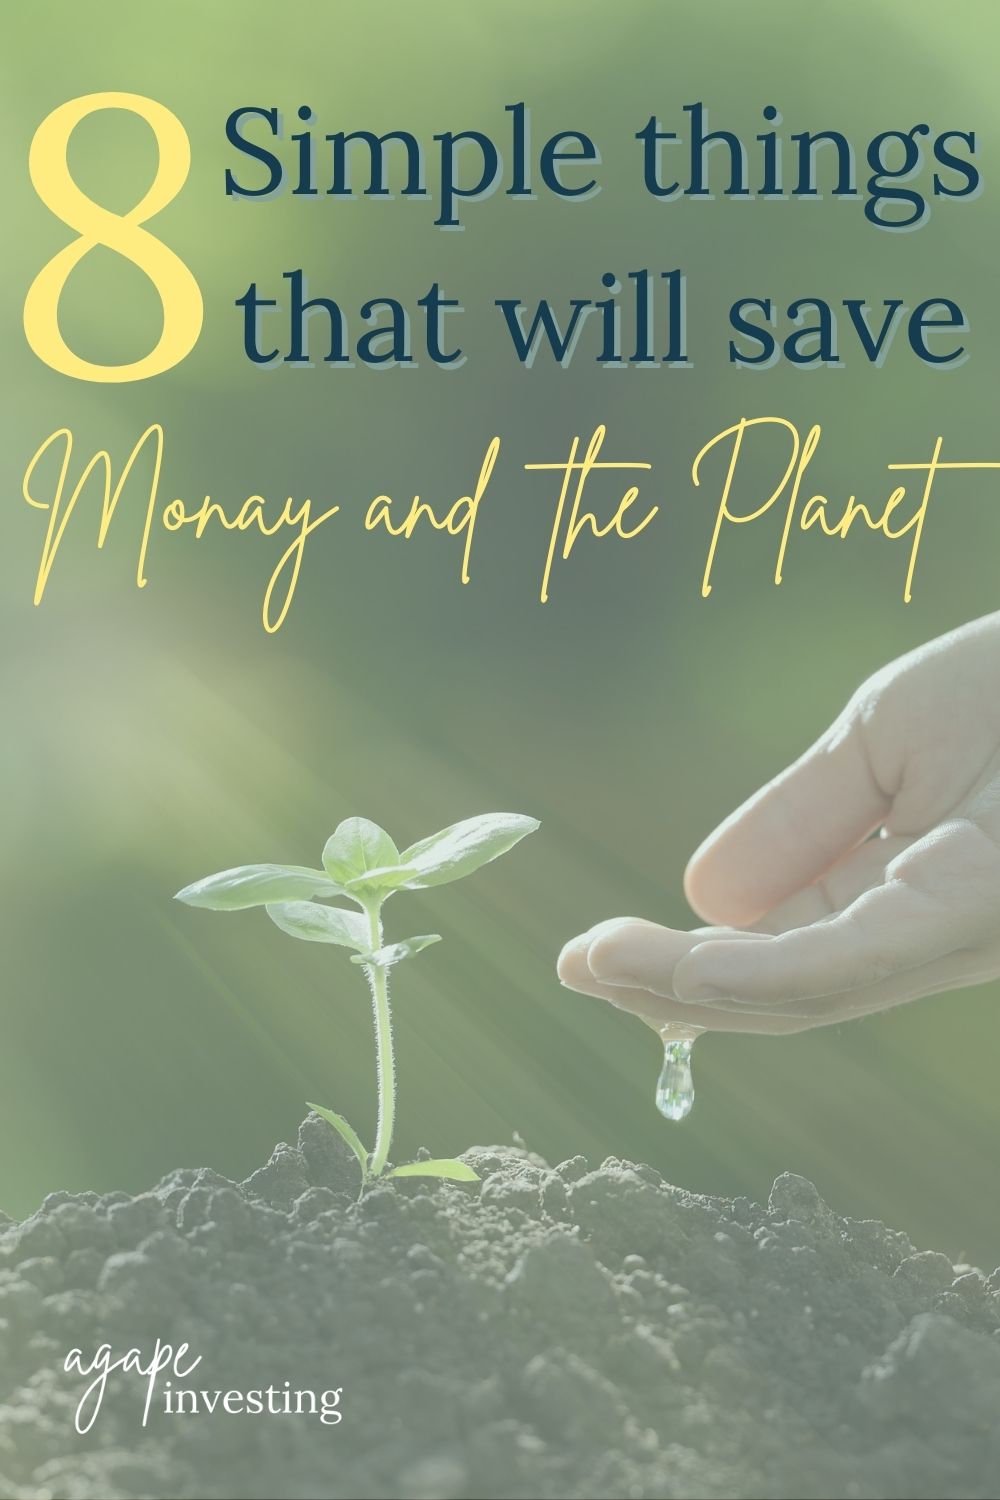 Are you looking for simple switches you can make in order to save money and the planet? Look no further because we have come up with a list of 8 simple things you can do today to save money and the planet! No dramatic live changes or expensive purchases, just simple things you can start doing today! #savemoney #savethe planet #ecofriendly #nowaste #moneysavingtips